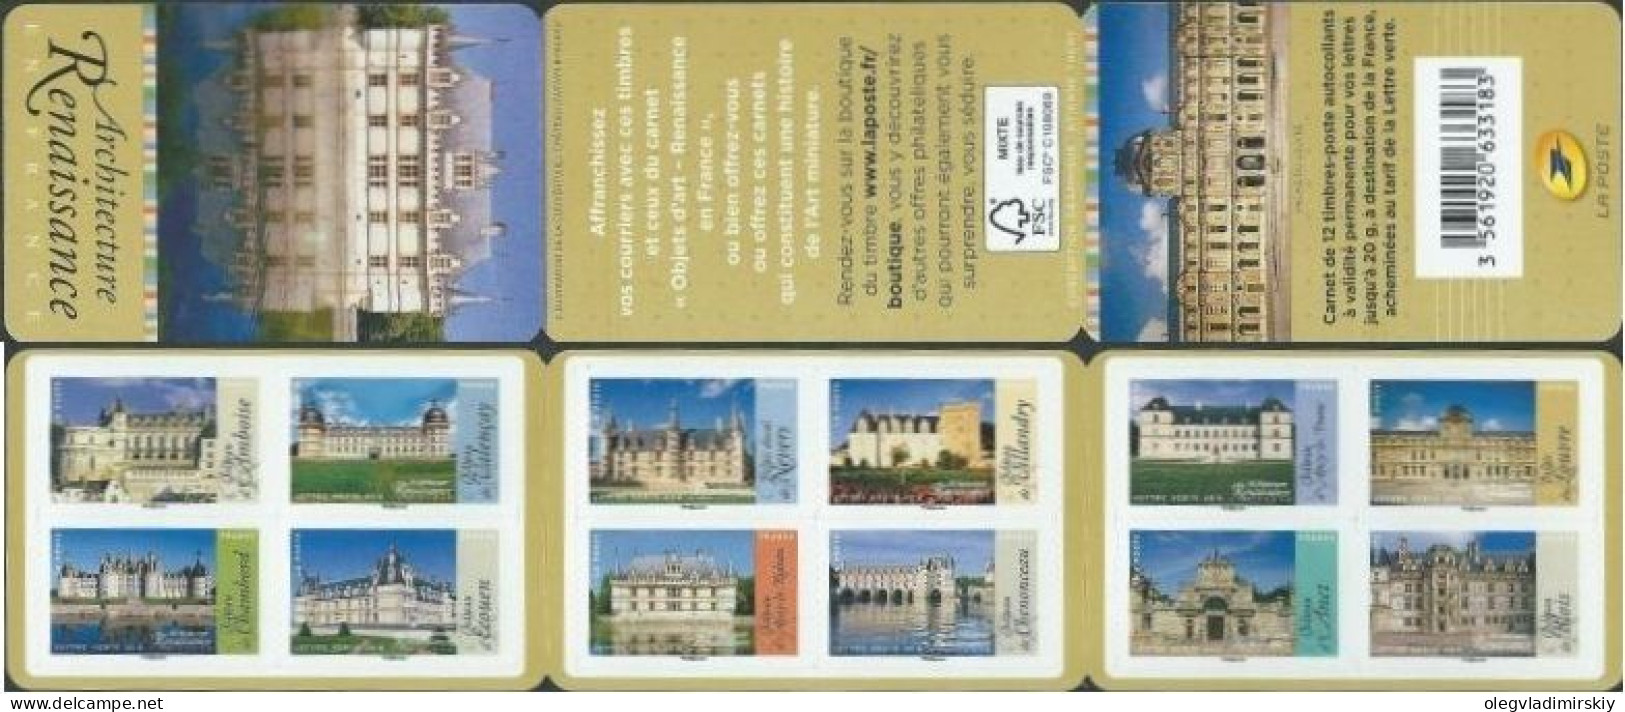 France 2015 Architecture Of Renaissance Castles Palaces Museums Set Of 12 Stamps In Booklet MNH - Châteaux